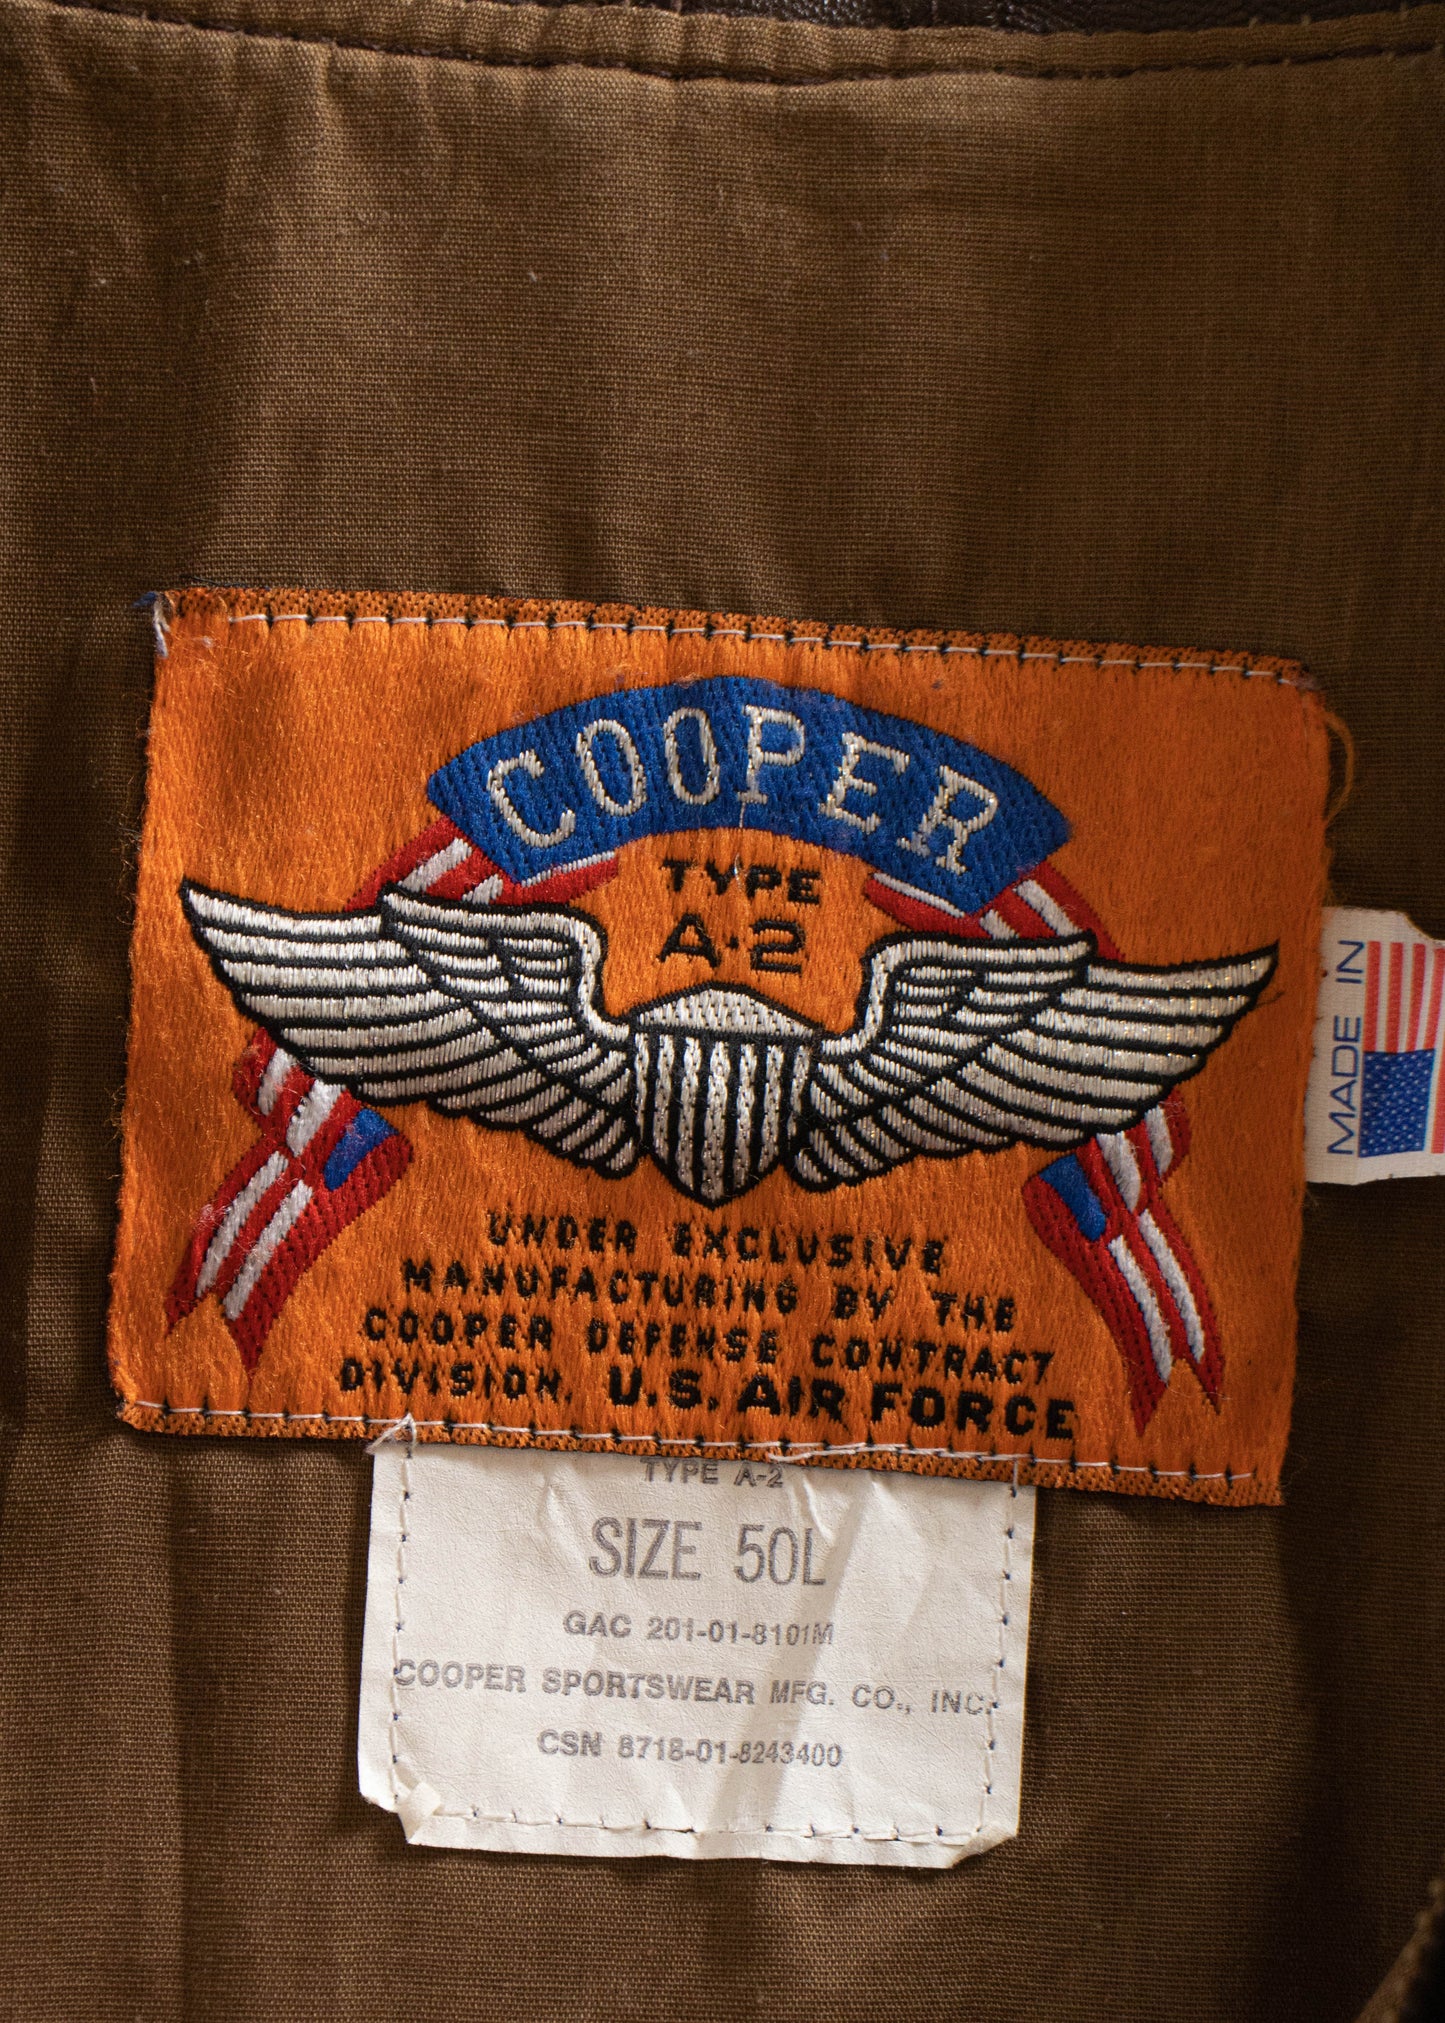 1980s Cooper Type A-2 Air Force Aviator Jacket Size XL/2XL